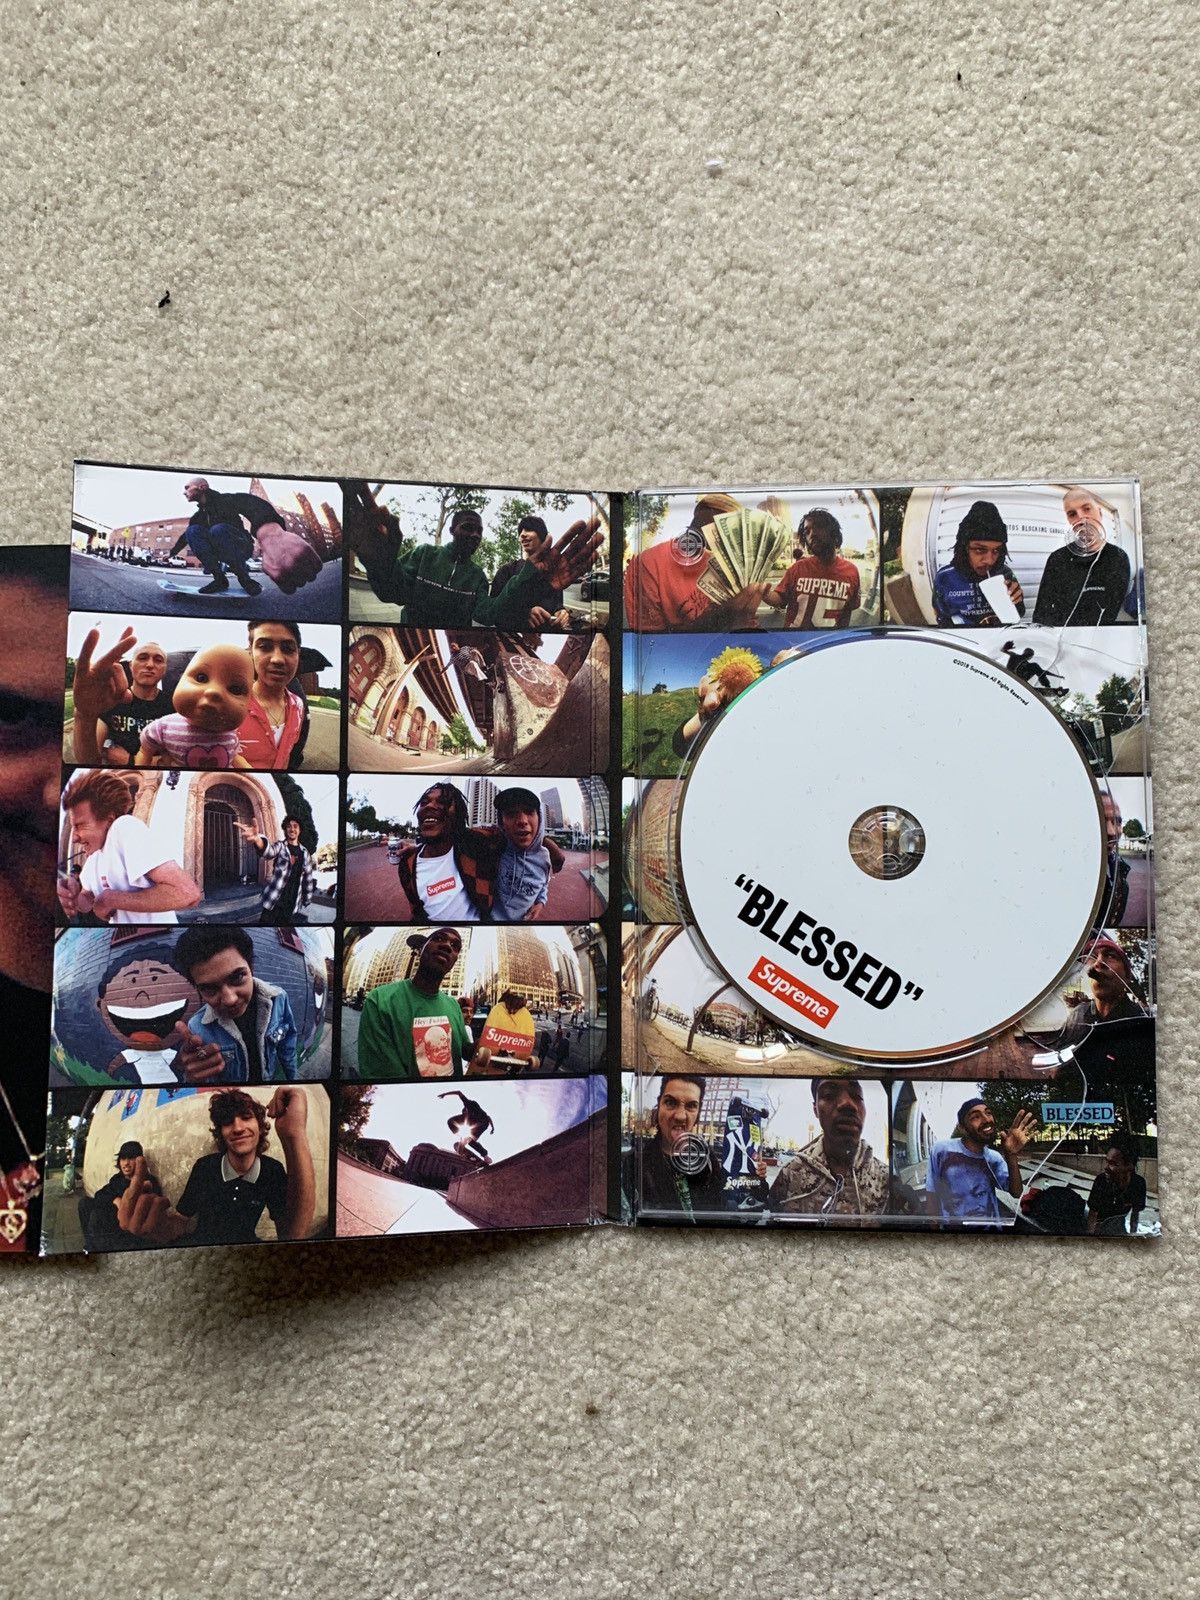 Supreme Supreme Blessed DVD and Photobook | Grailed